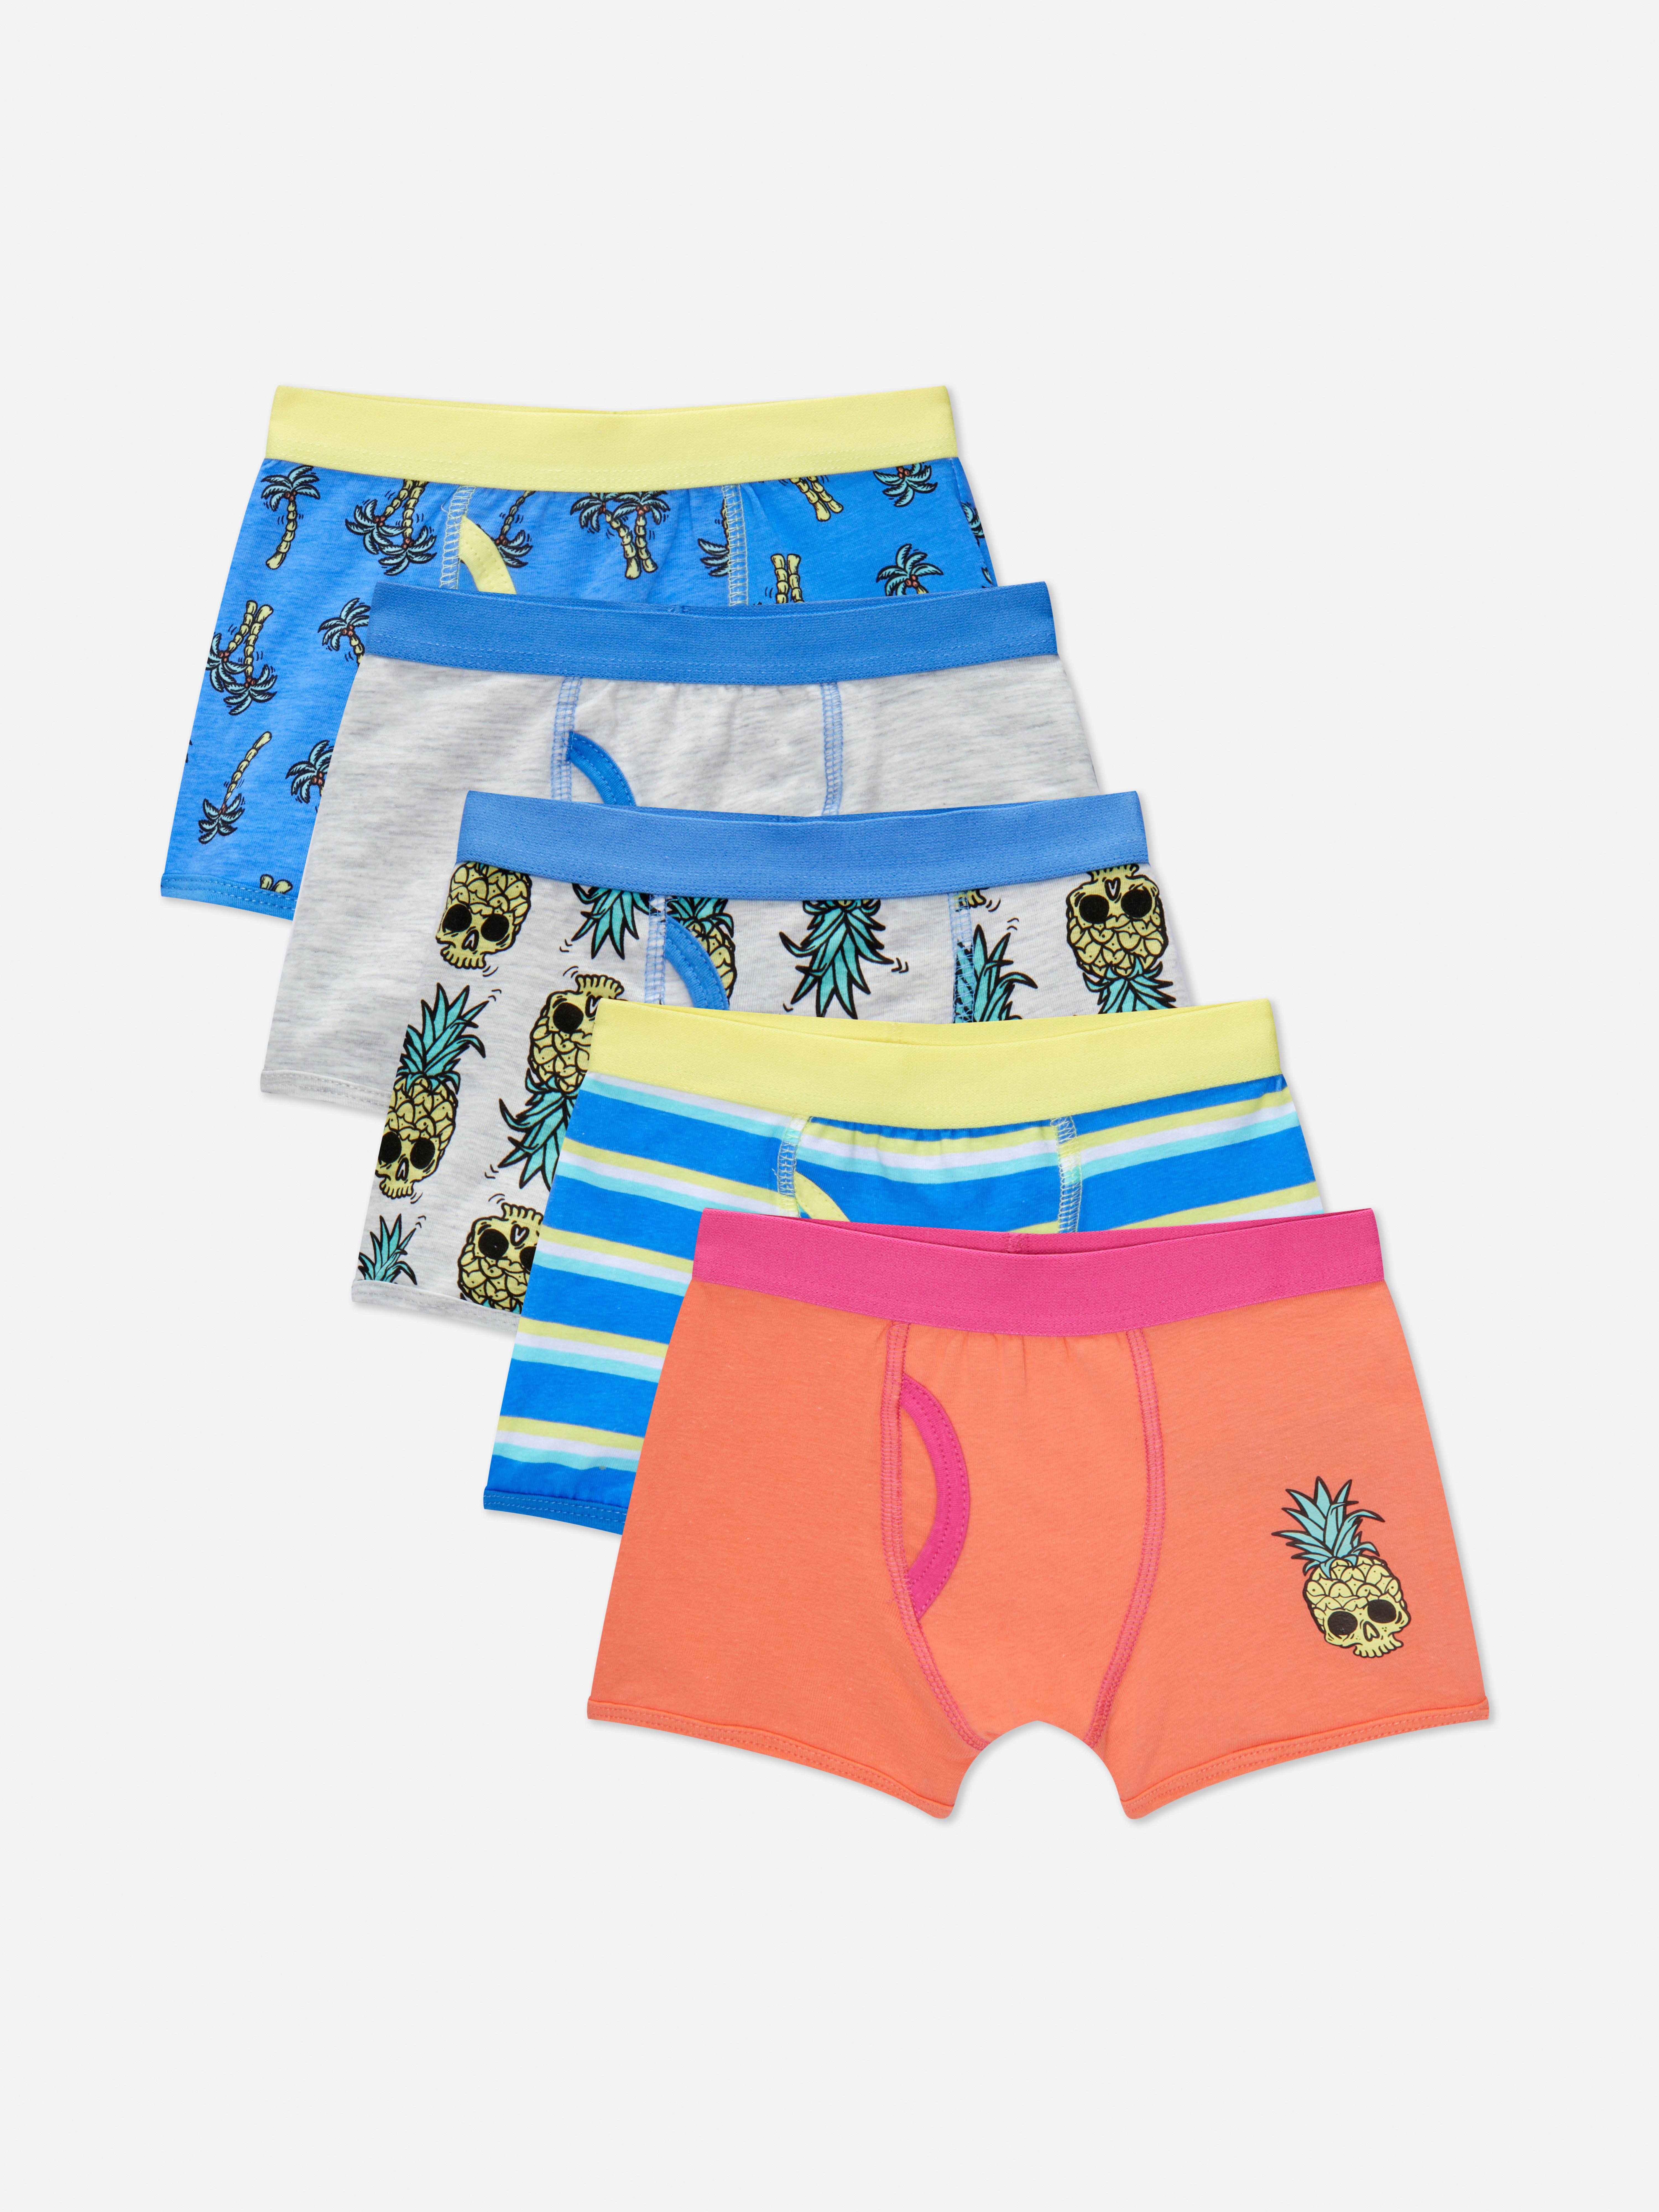 GOMOMOosh 211122 Boys Boxer Primark Seamless Underwear Set Blue Striped  Cotton Clothes For Kids Ages 2 14 From Kong06, $11.91